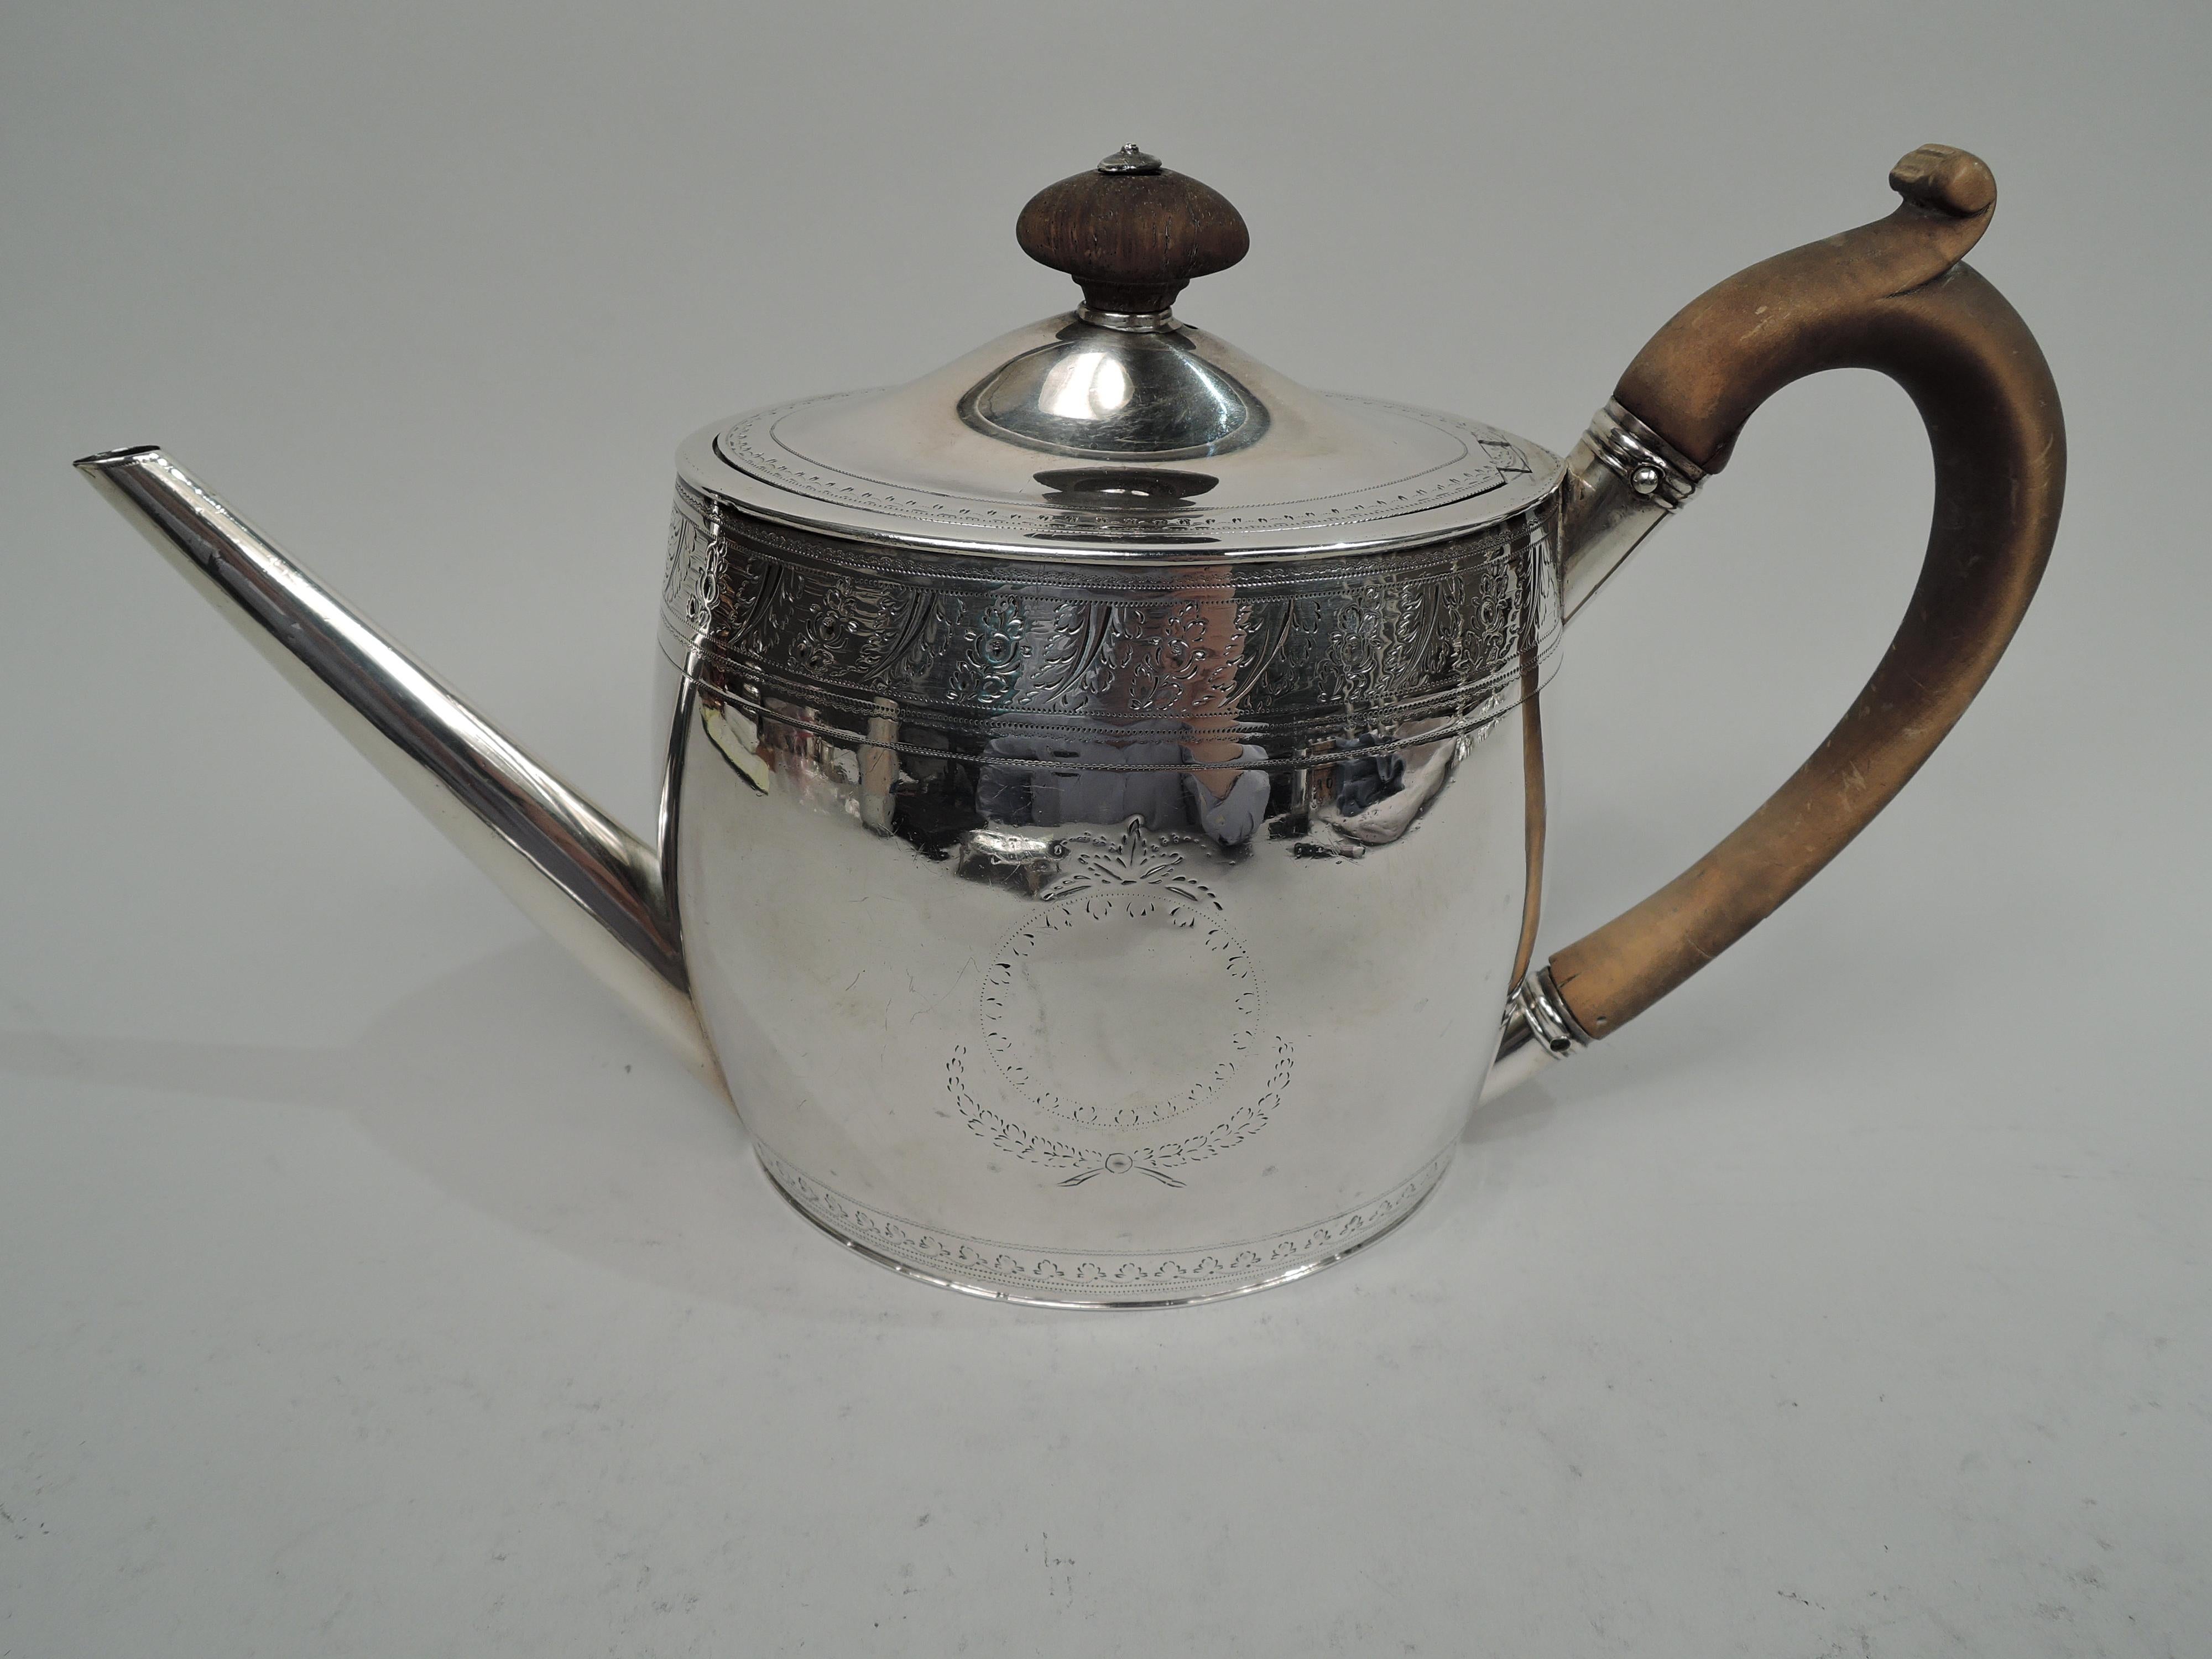 George III sterling silver teapot. Made by George Smith & Thomas Hayter in London in 1795. Ovoid body with straight diagonal spout and capped. Cover hinged and gently raised. Cover finial and capped high-looping handle are stained wood. Ornamental